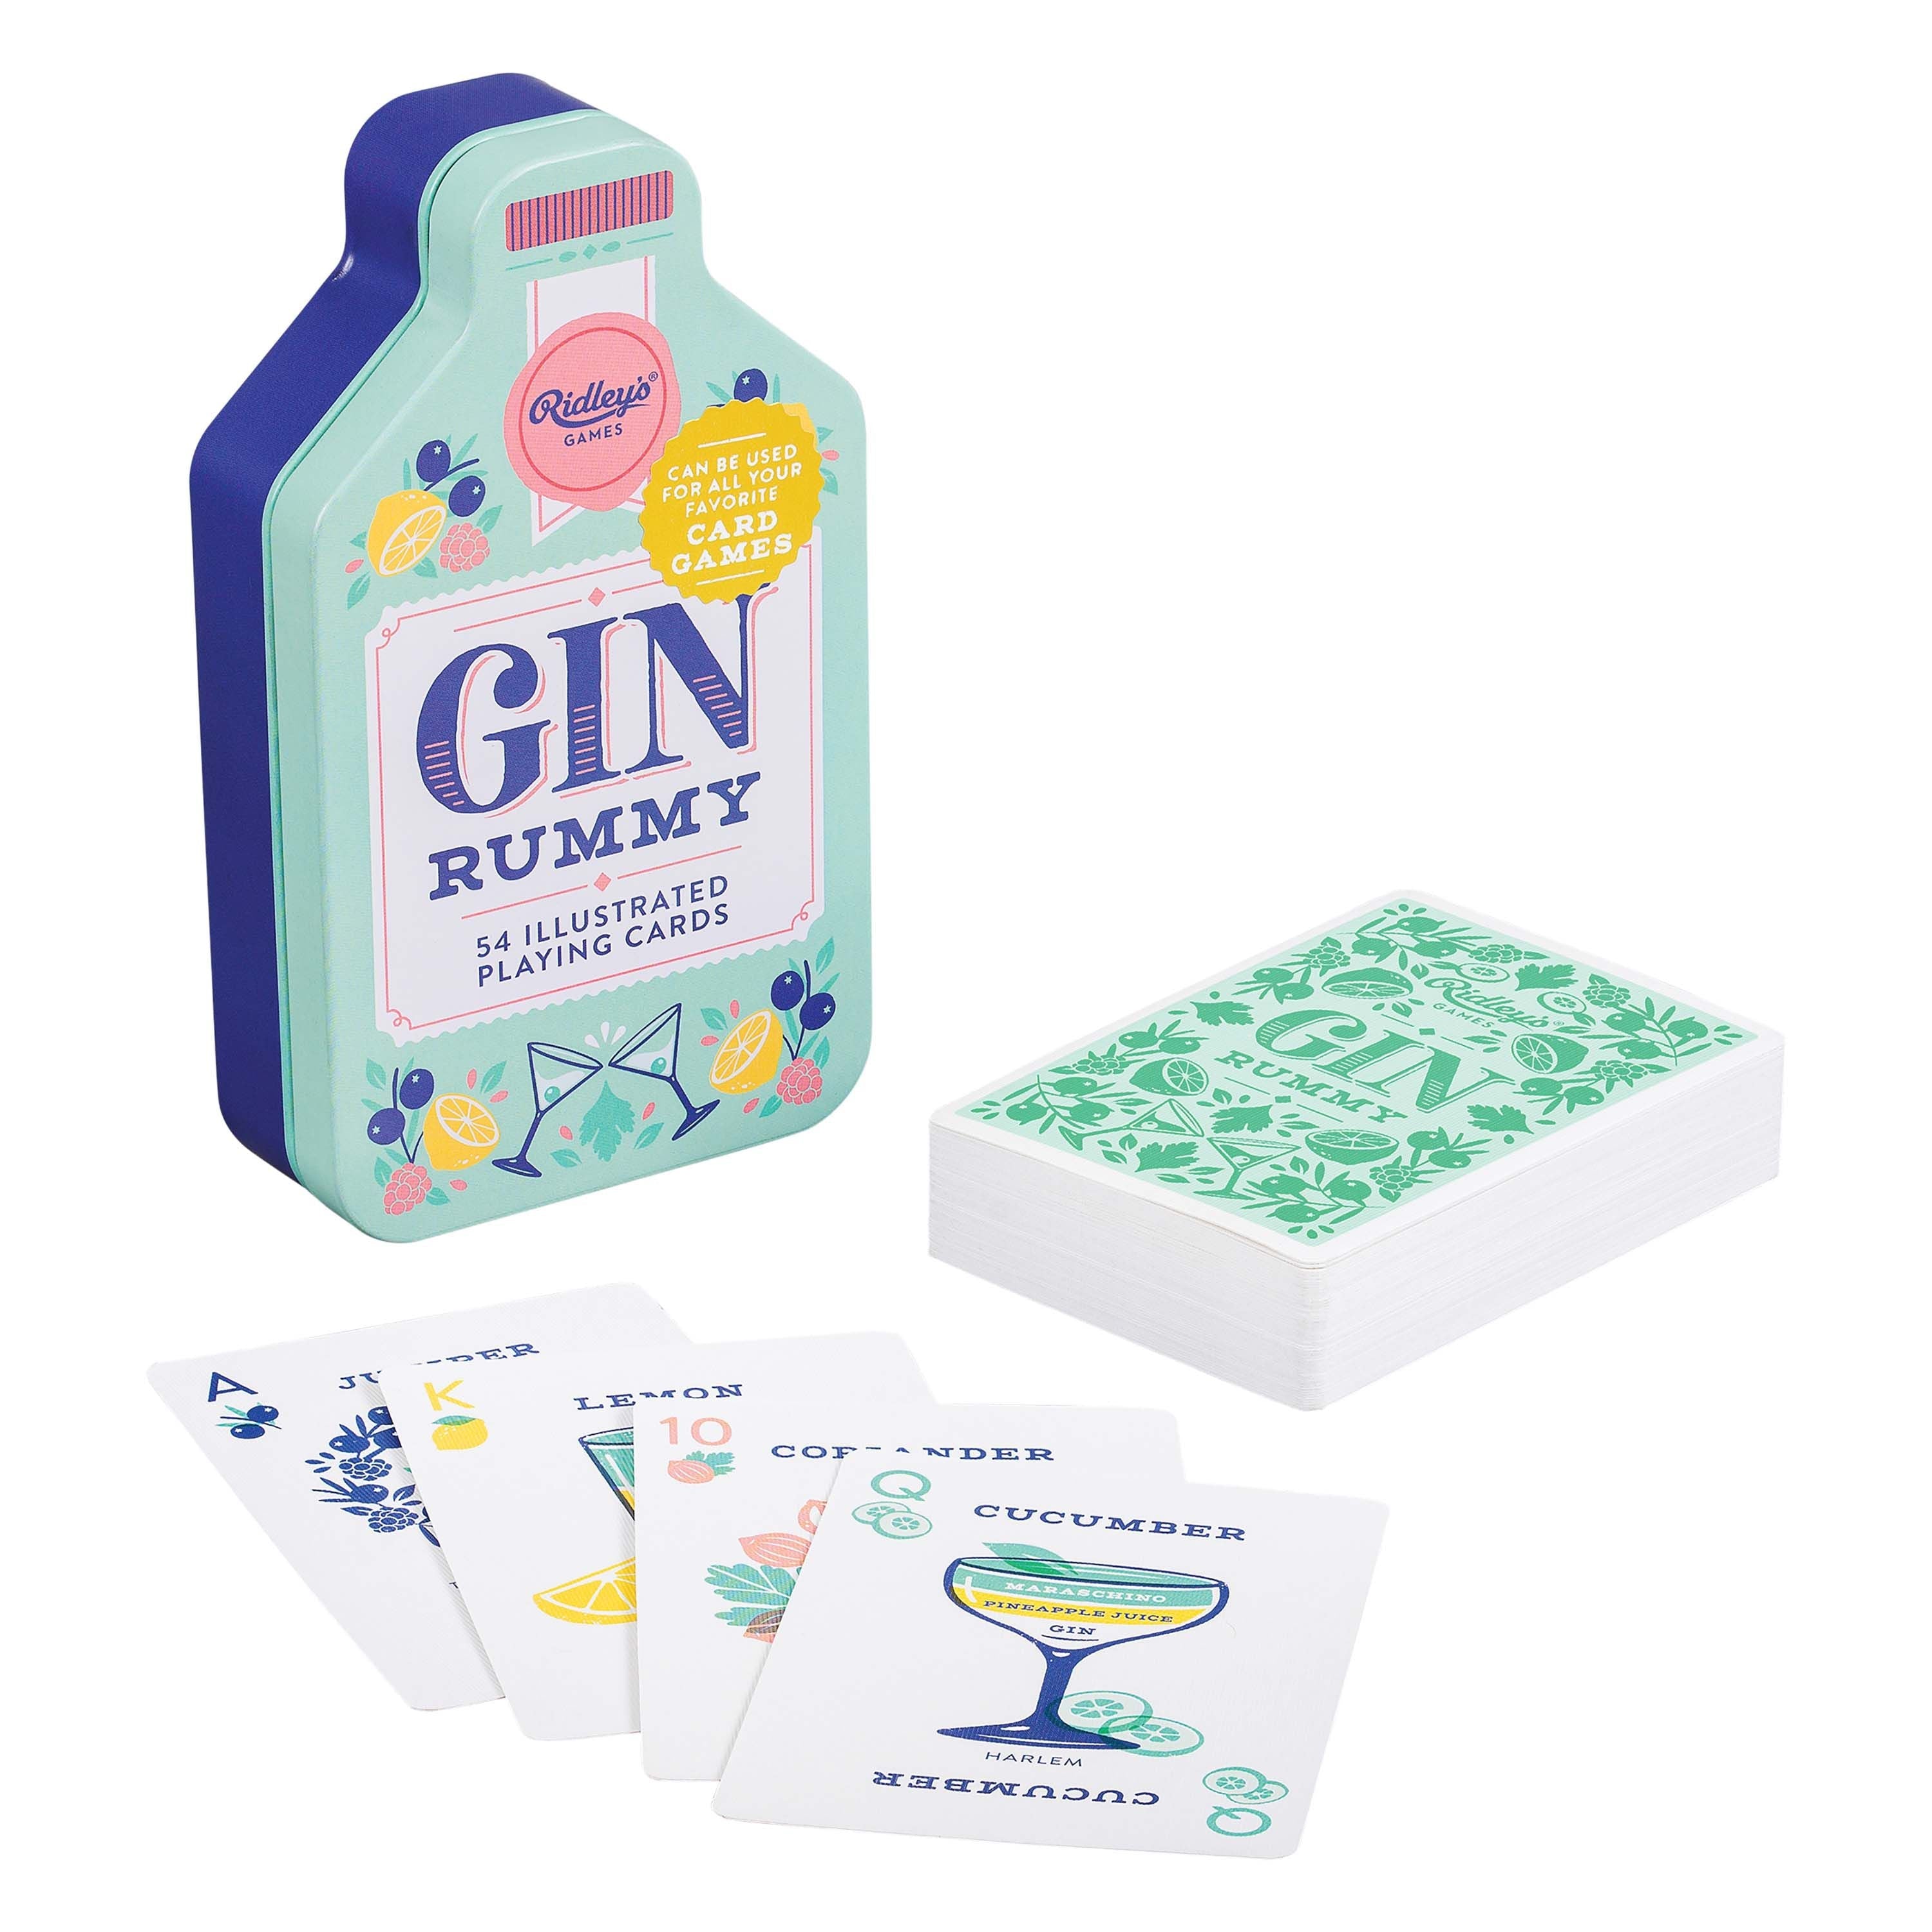 Gin Rummy Playing Cards-Fun & Games-Ridley's-The Bay Room